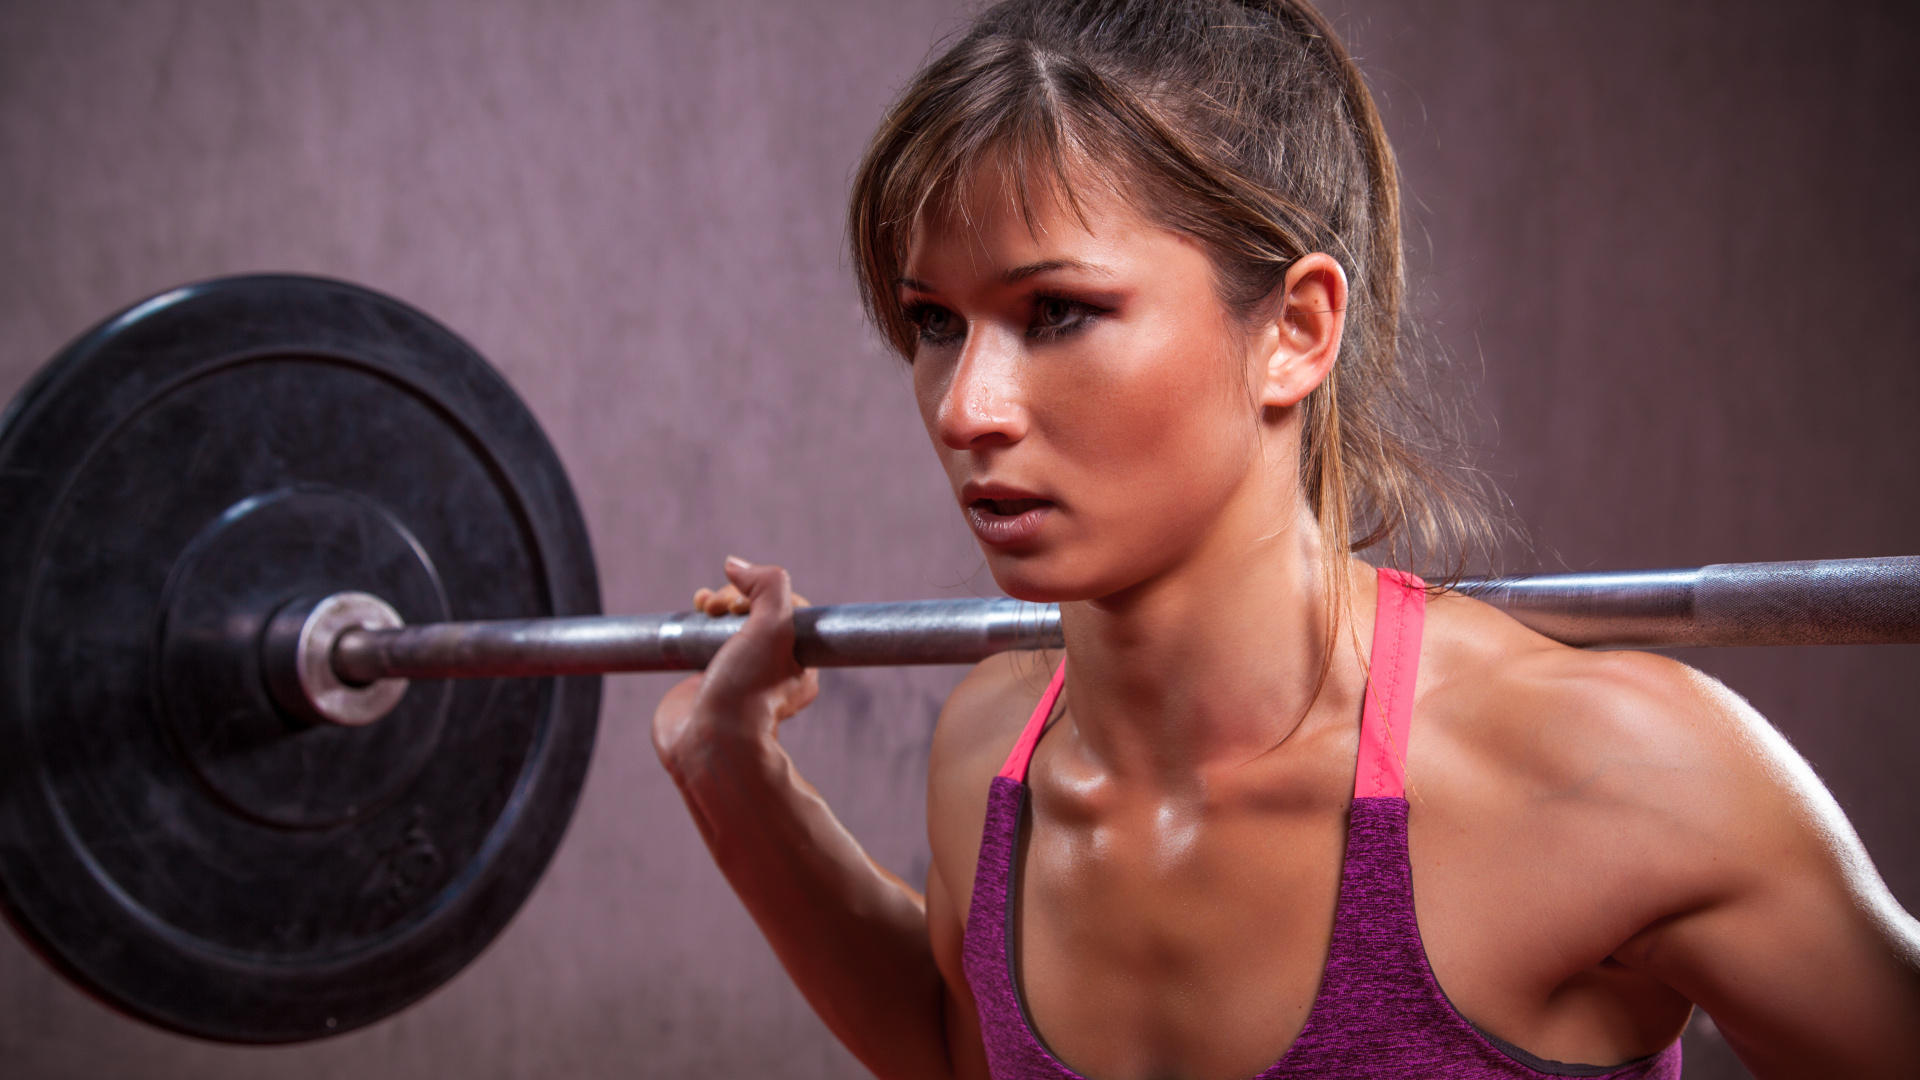 Woman in Pink Tank Top Holding Barbell. Wallpaper in 1920x1080 Resolution